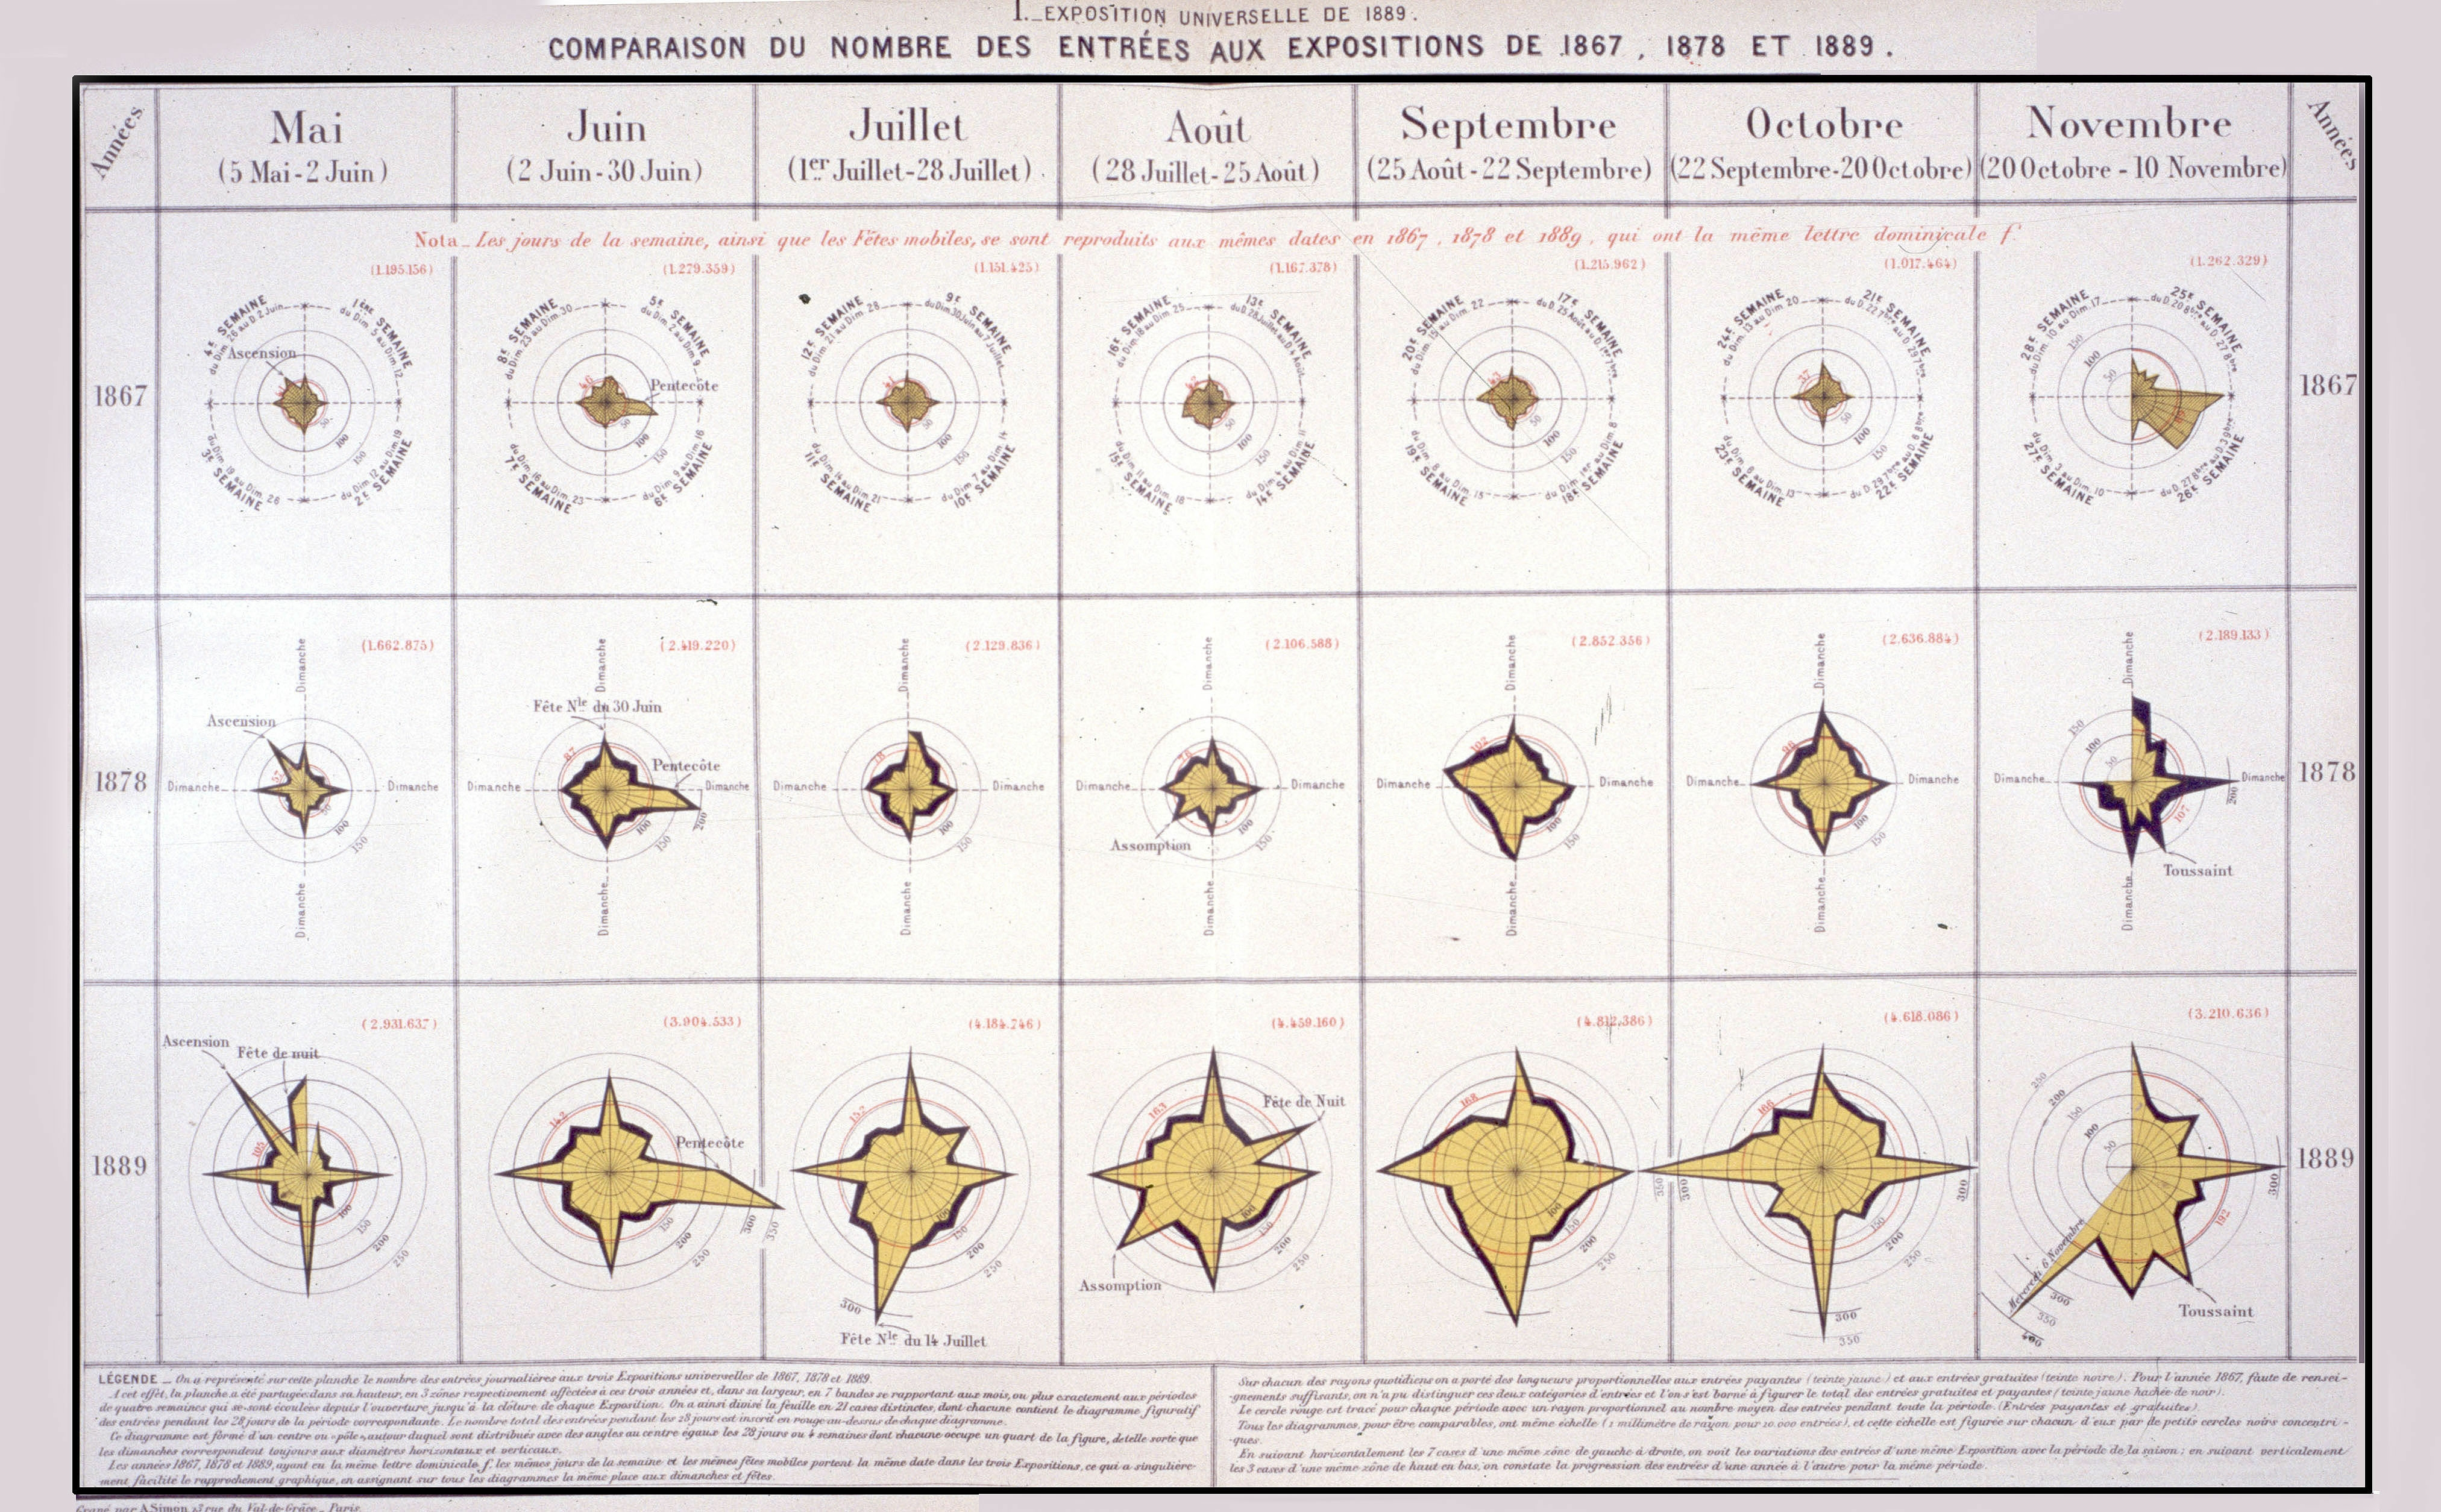 Two-way star / radar diagrams: “Comparison of the numbers attending the Expositions of 1867, 1878 and 1889” (Exposition Universelle de 1889: Comparaison du Nombre des Entrées aux Expositions de 1867, 1878 et 1889). In each star-shaped figure the length of the radial dimension shows the number of paid entrants on each day of the month.